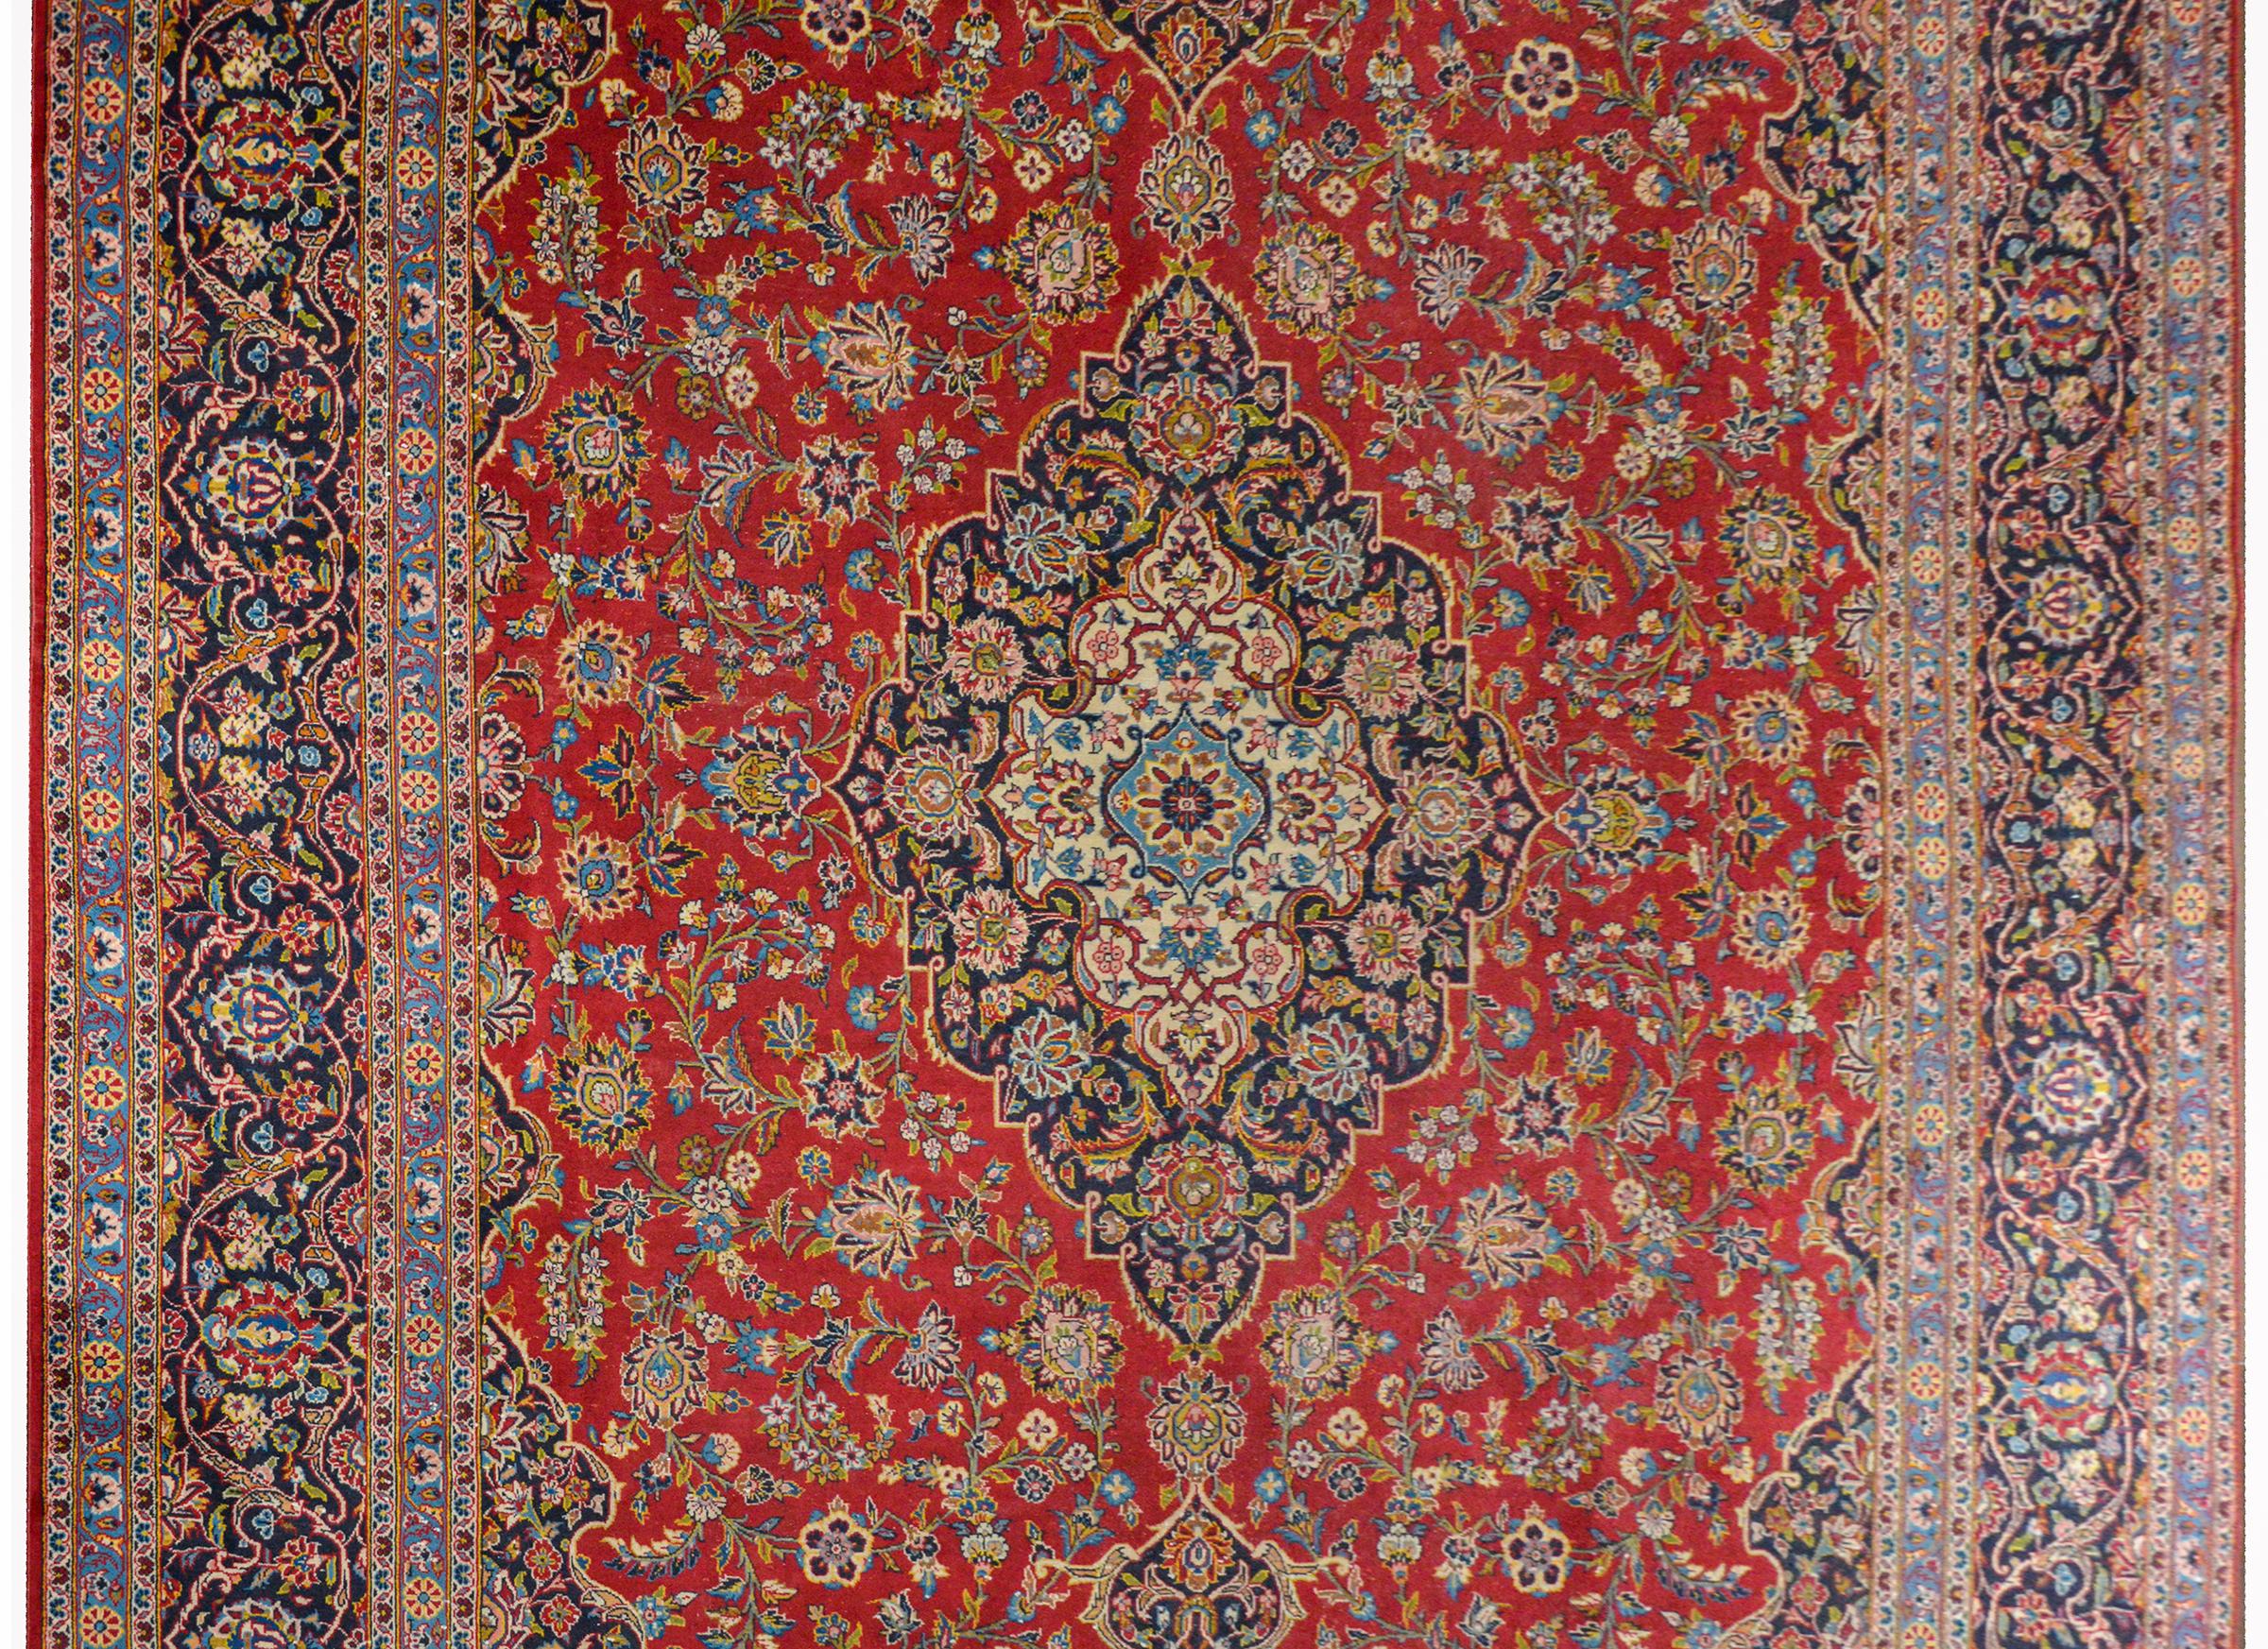 A wonderful early 20th century traditional Persian Kashan rug with a large diamond medallion amidst a field of large-scale flowers on a brilliant crimson background. The border is exceptional with multiple floral and scrolling vine patterns woven in